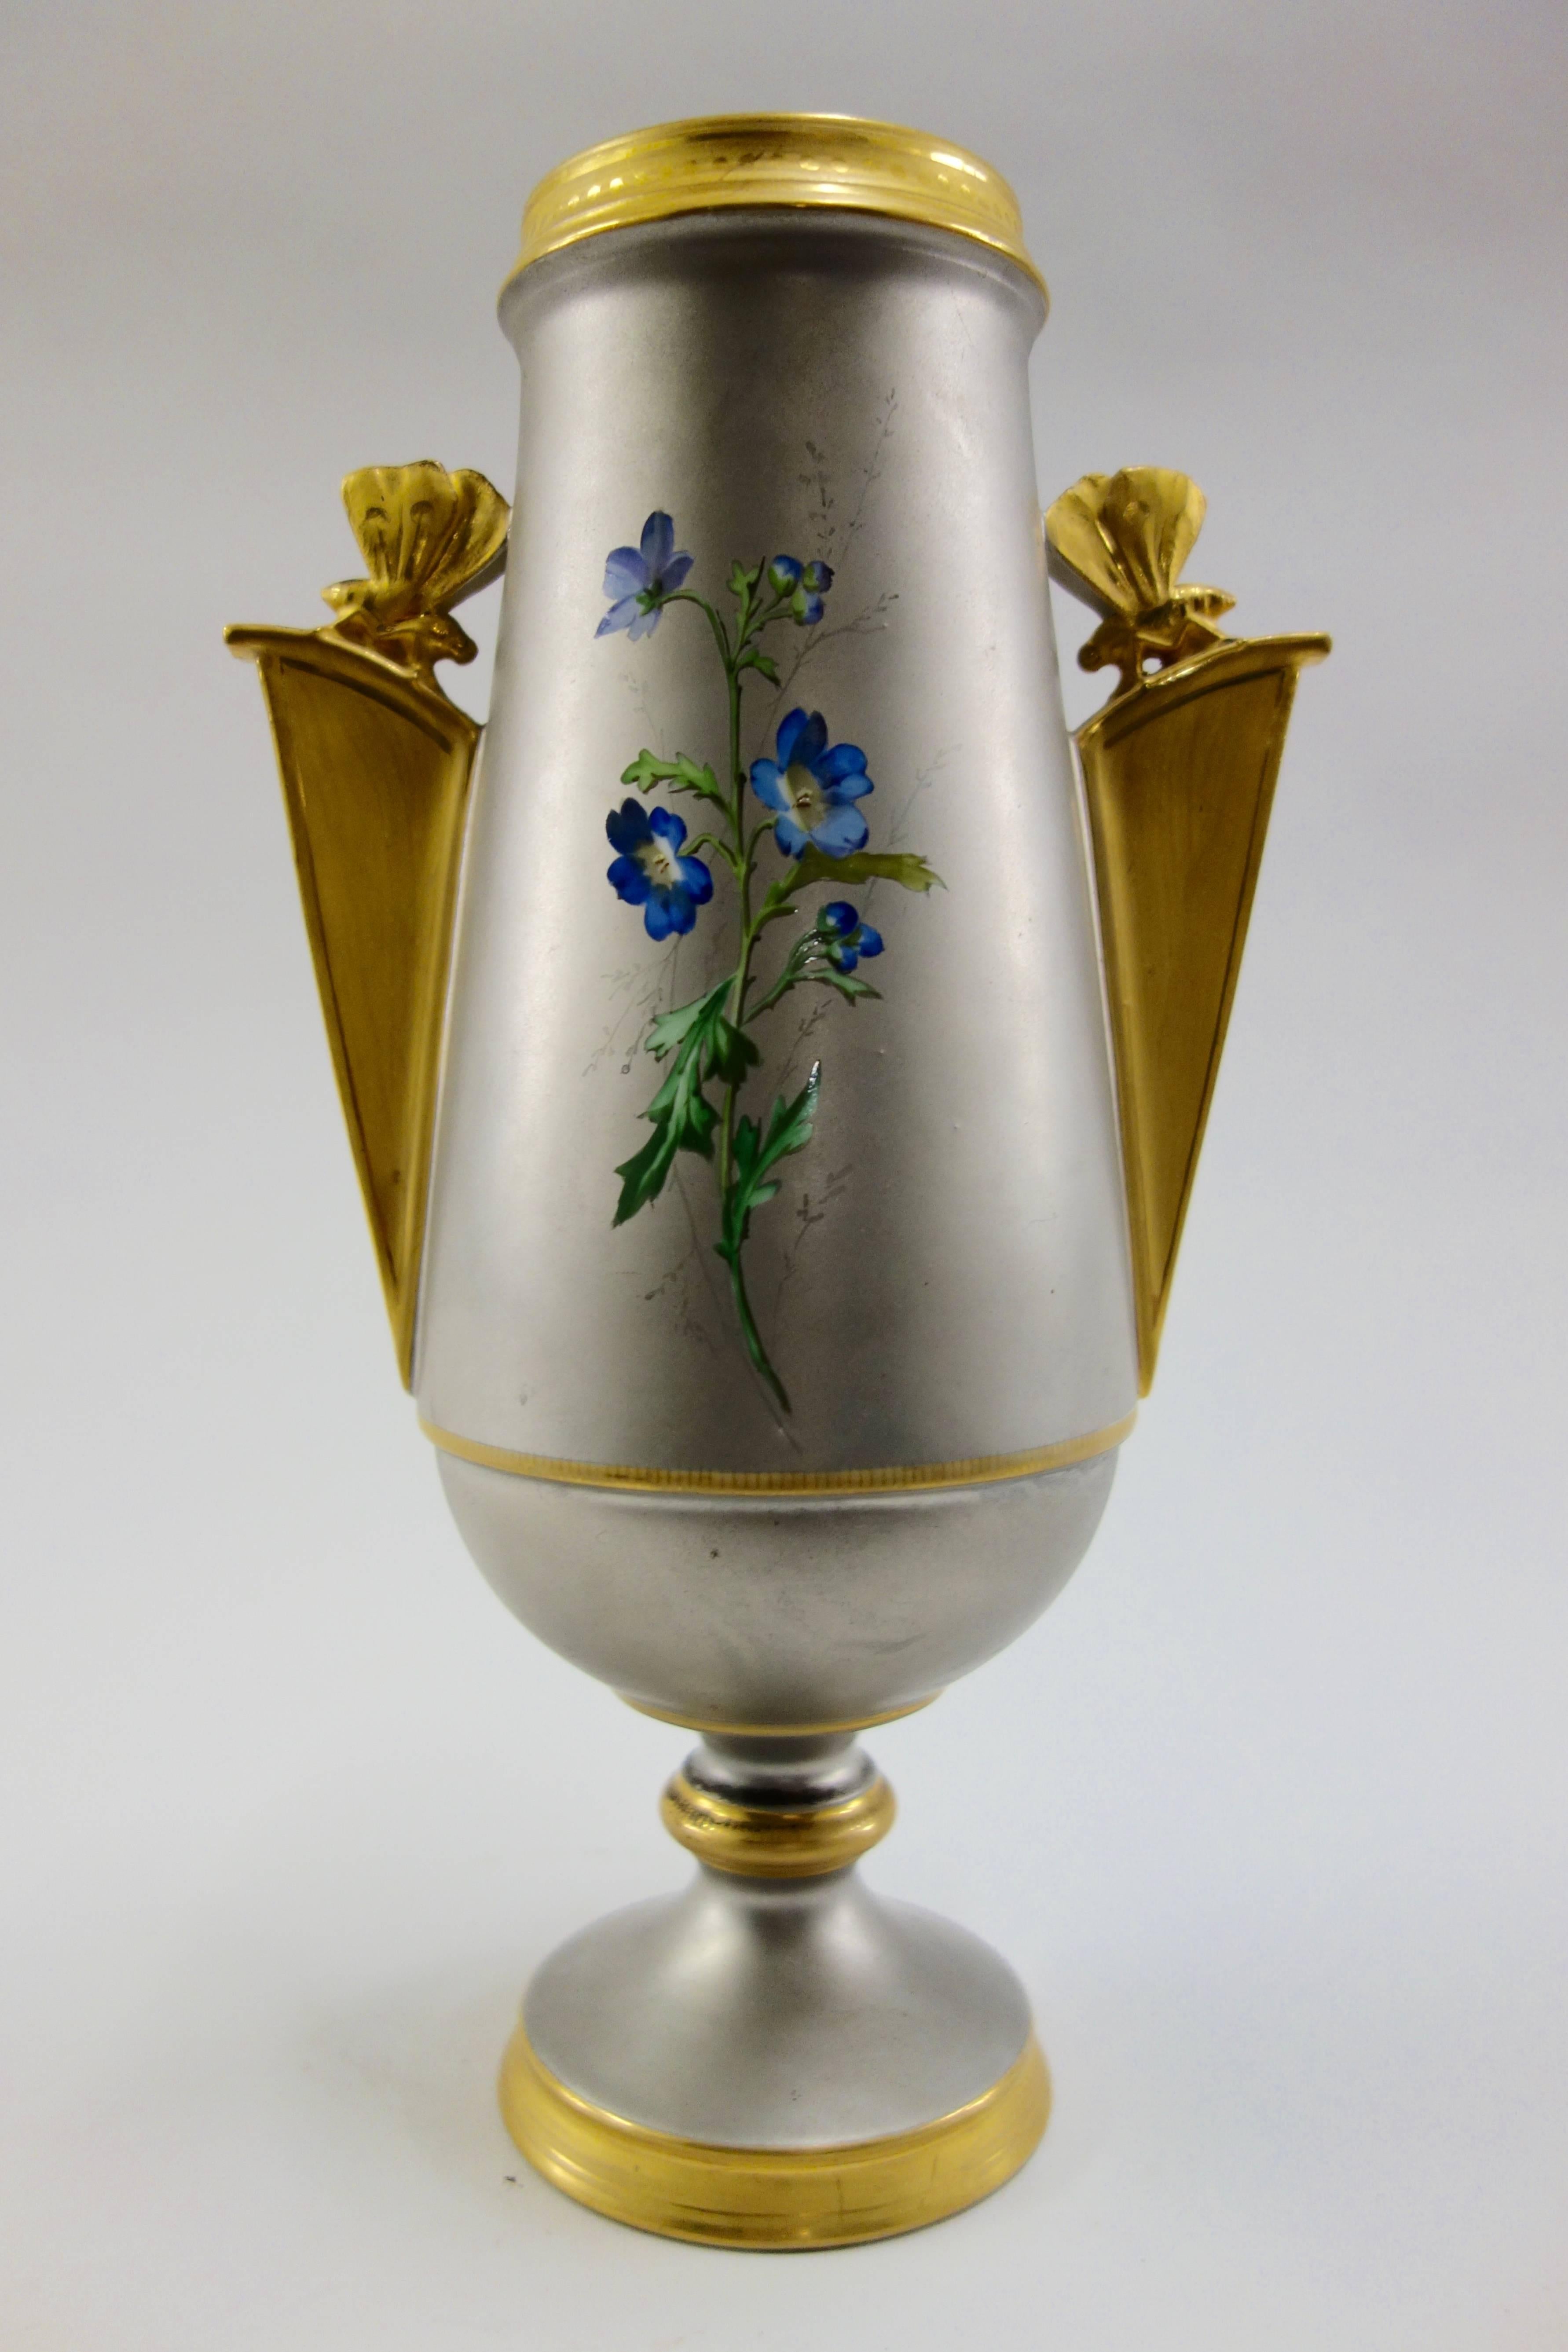 An Aesthetic Movement French enameled vase, circa 1880, the front with vividly colored, glossy, highly detailed flowers and leaves, the back with a single sprig of blue blooms attributed to Narcisse Vivien, known for his use of a platinum ground,